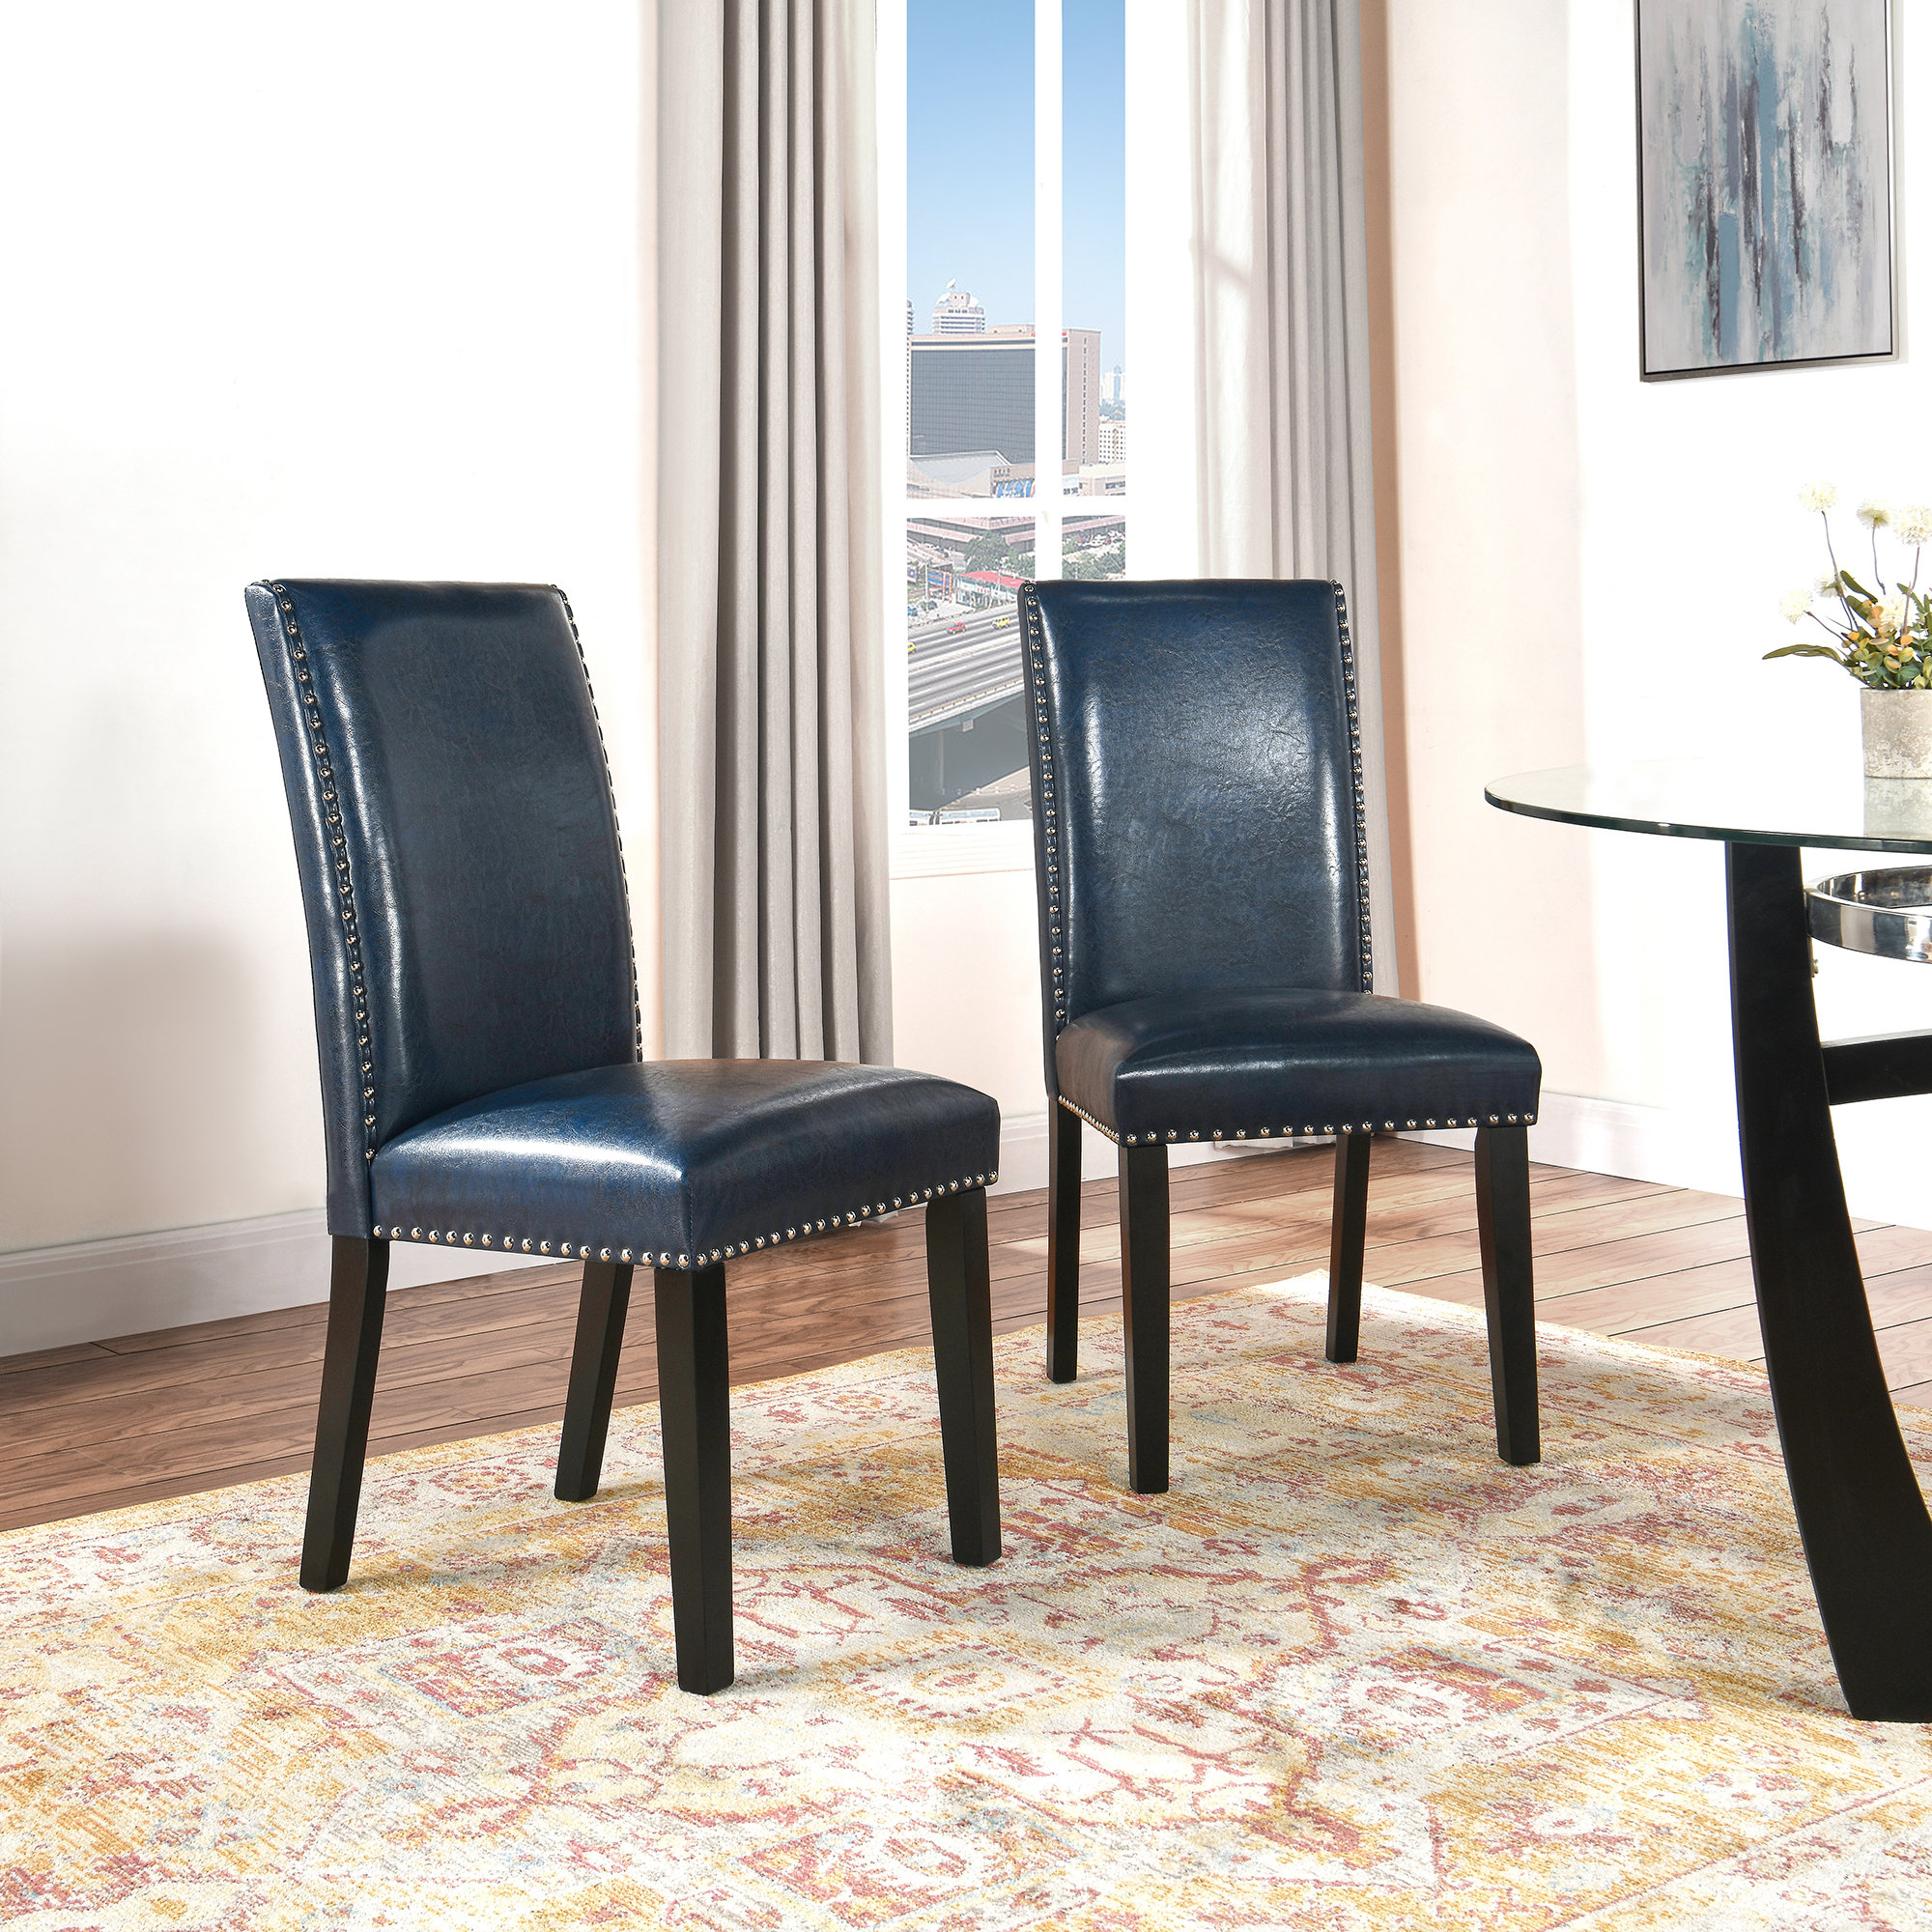 Winston Porter Nysir Faux Leather Dining Chairs with Nailhead Trim